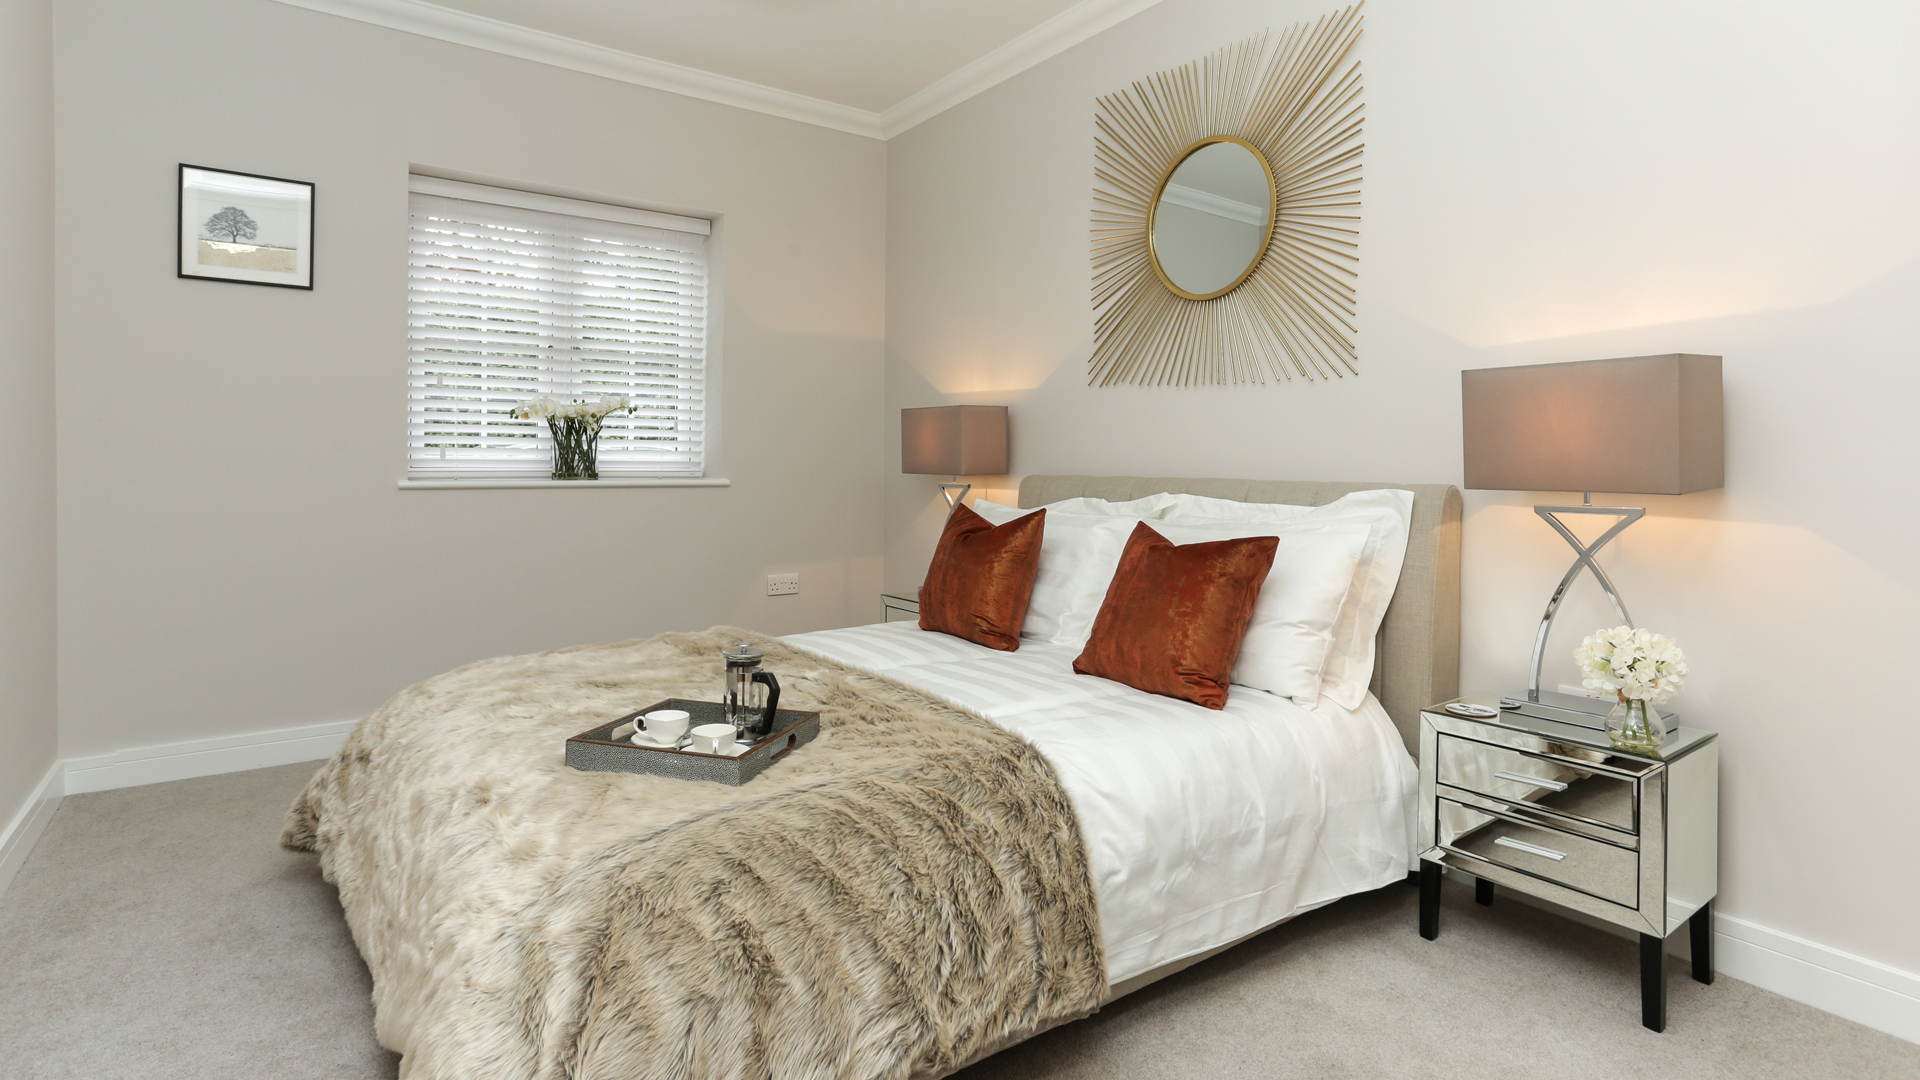 Cobnut Park plot 6 bedroom with a coffee set on the bed.